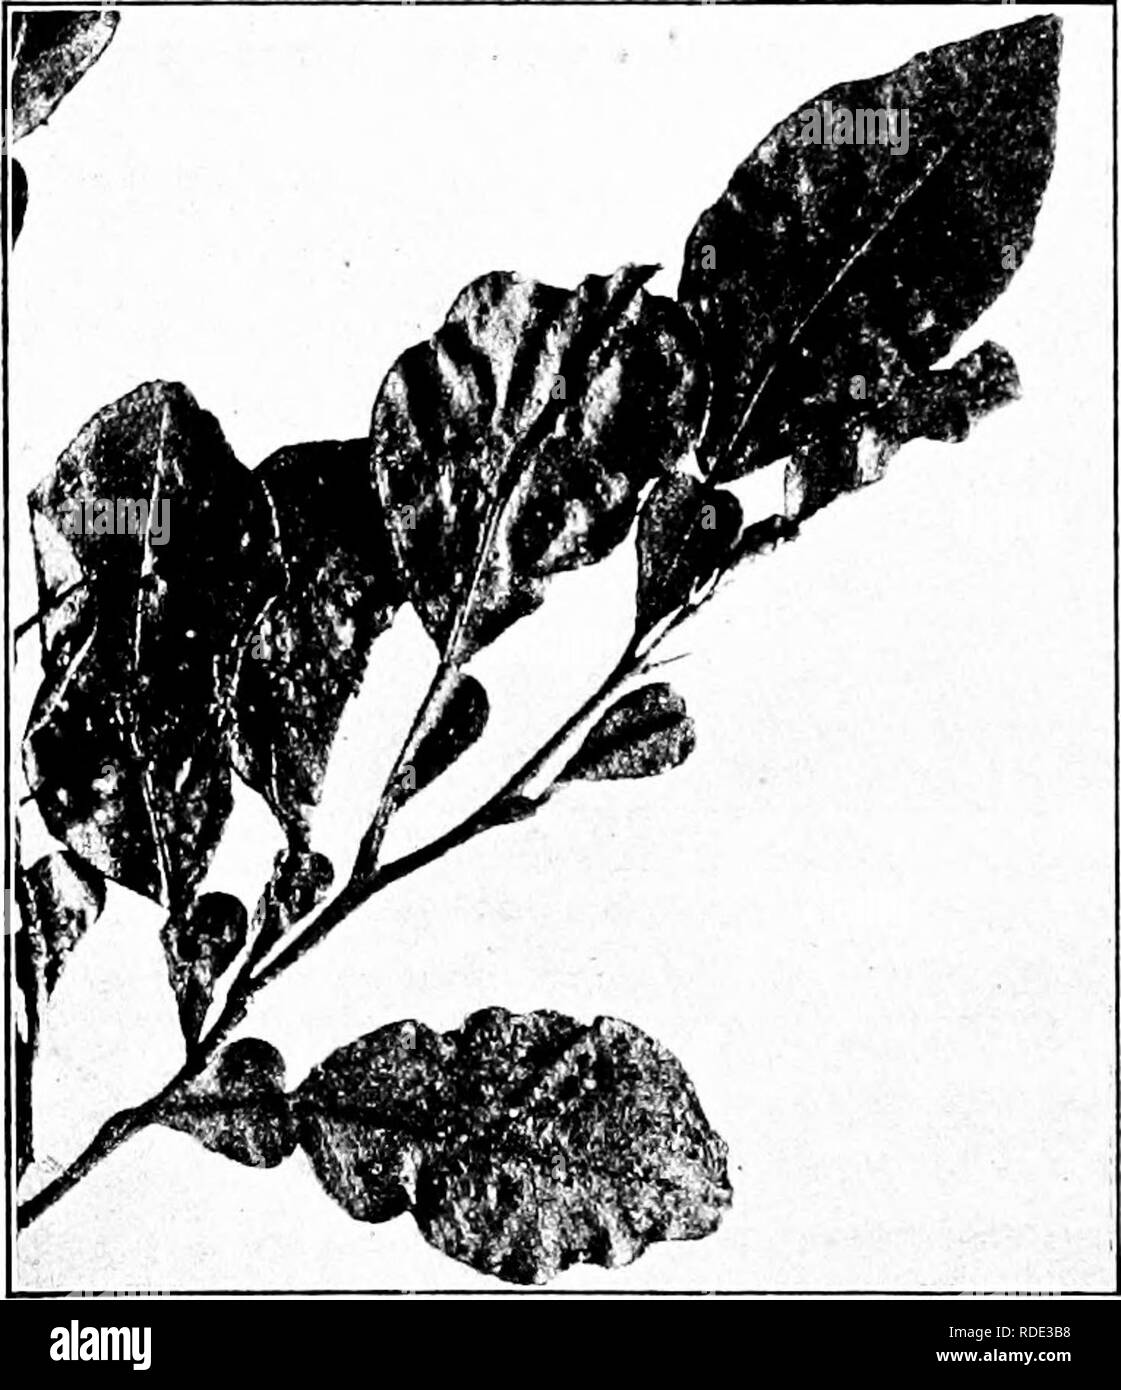 . Diseases of economic plants . Plant diseases. 188 DISEASES OF ECONOMIC PLANTS trance through slight imperfections of the skin at the navel end and make rotten areas under the skin. All diseased fruit should be collected and burned or buried deeply. Scab {Cladosporium elegans Penz.). — The scab has been. Fig. 81. —Scab of the sour orange. After Hume. known for twenty years, and occurs on the sour citrus fruits such as the pomelo, kumquat, and sour orange, though its presence on the last is of little importance. The disease attacks the young leaves, twigs, and fruit, and causes them to produce Stock Photo